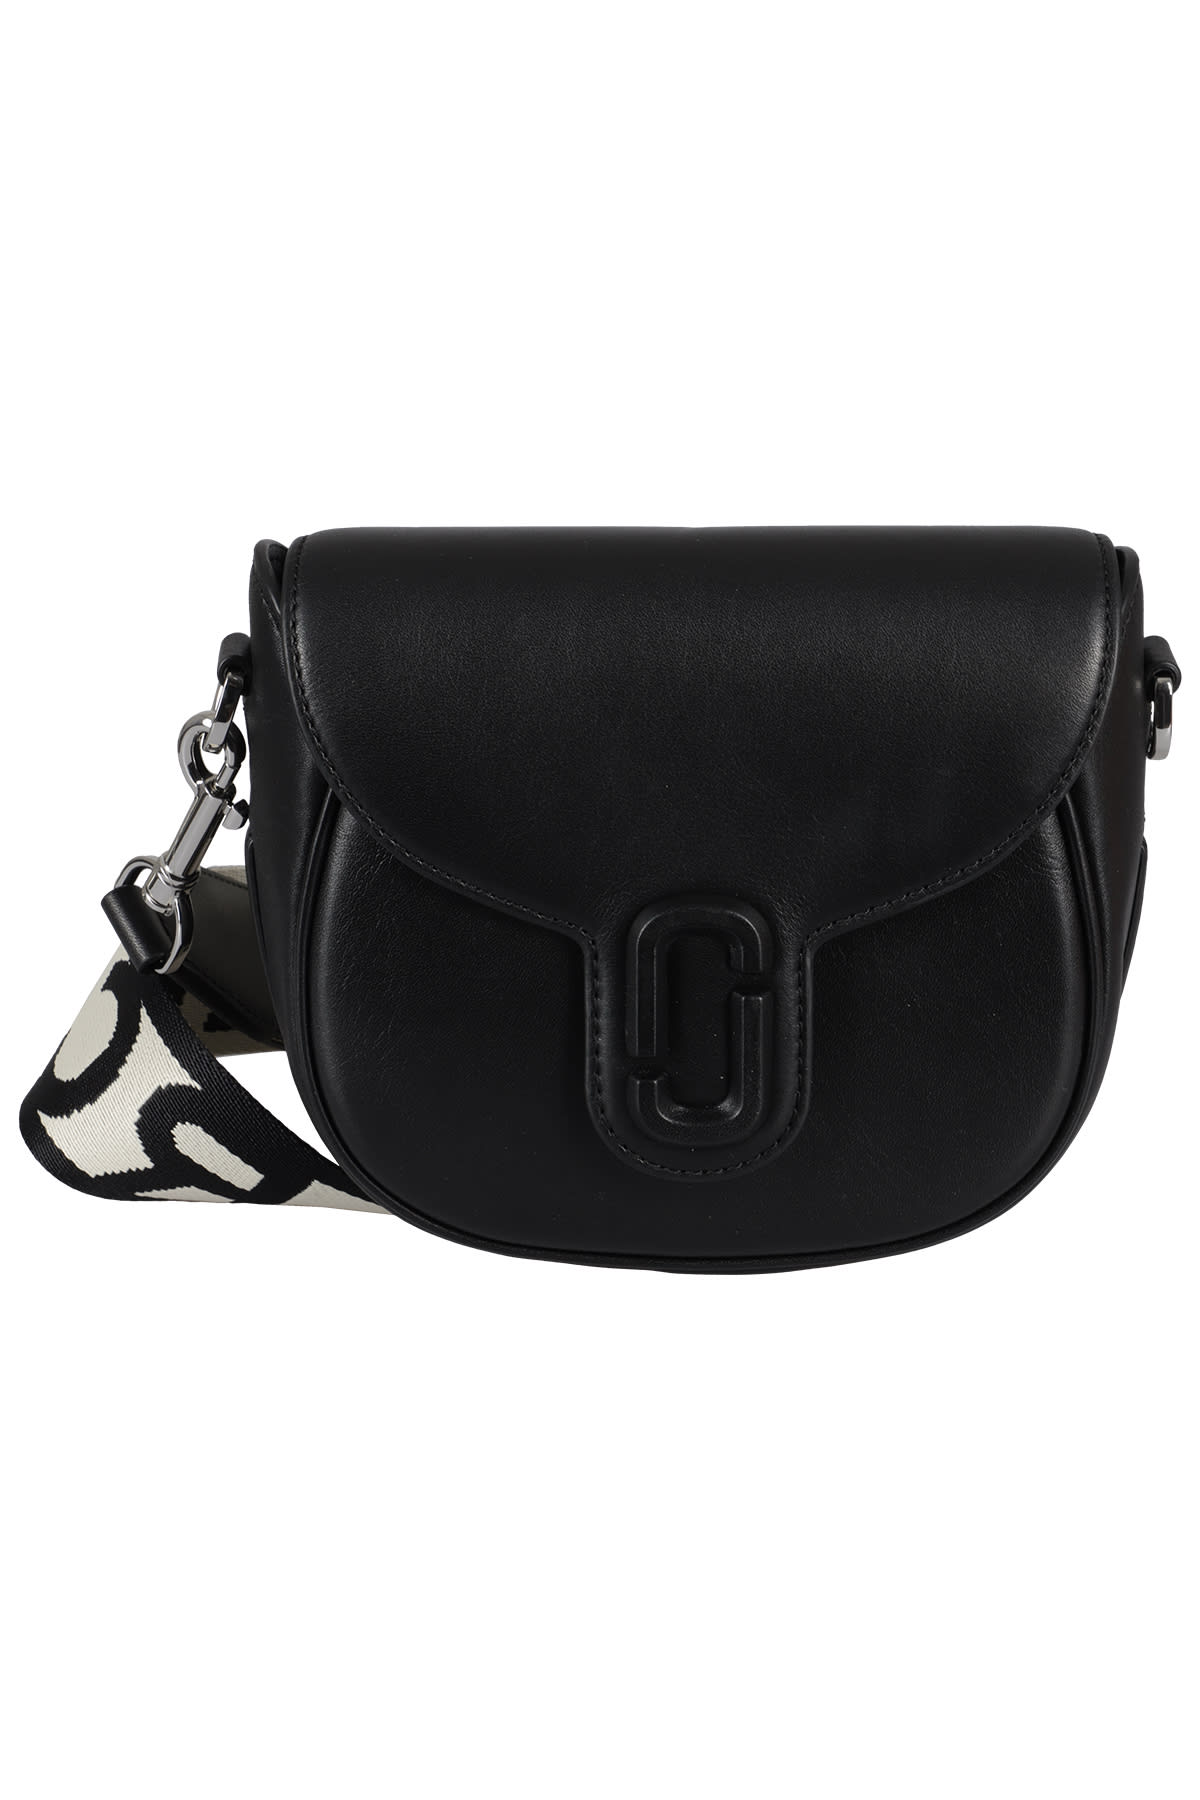 Marc Jacobs The J Marc Small Saddle Bag In Nero